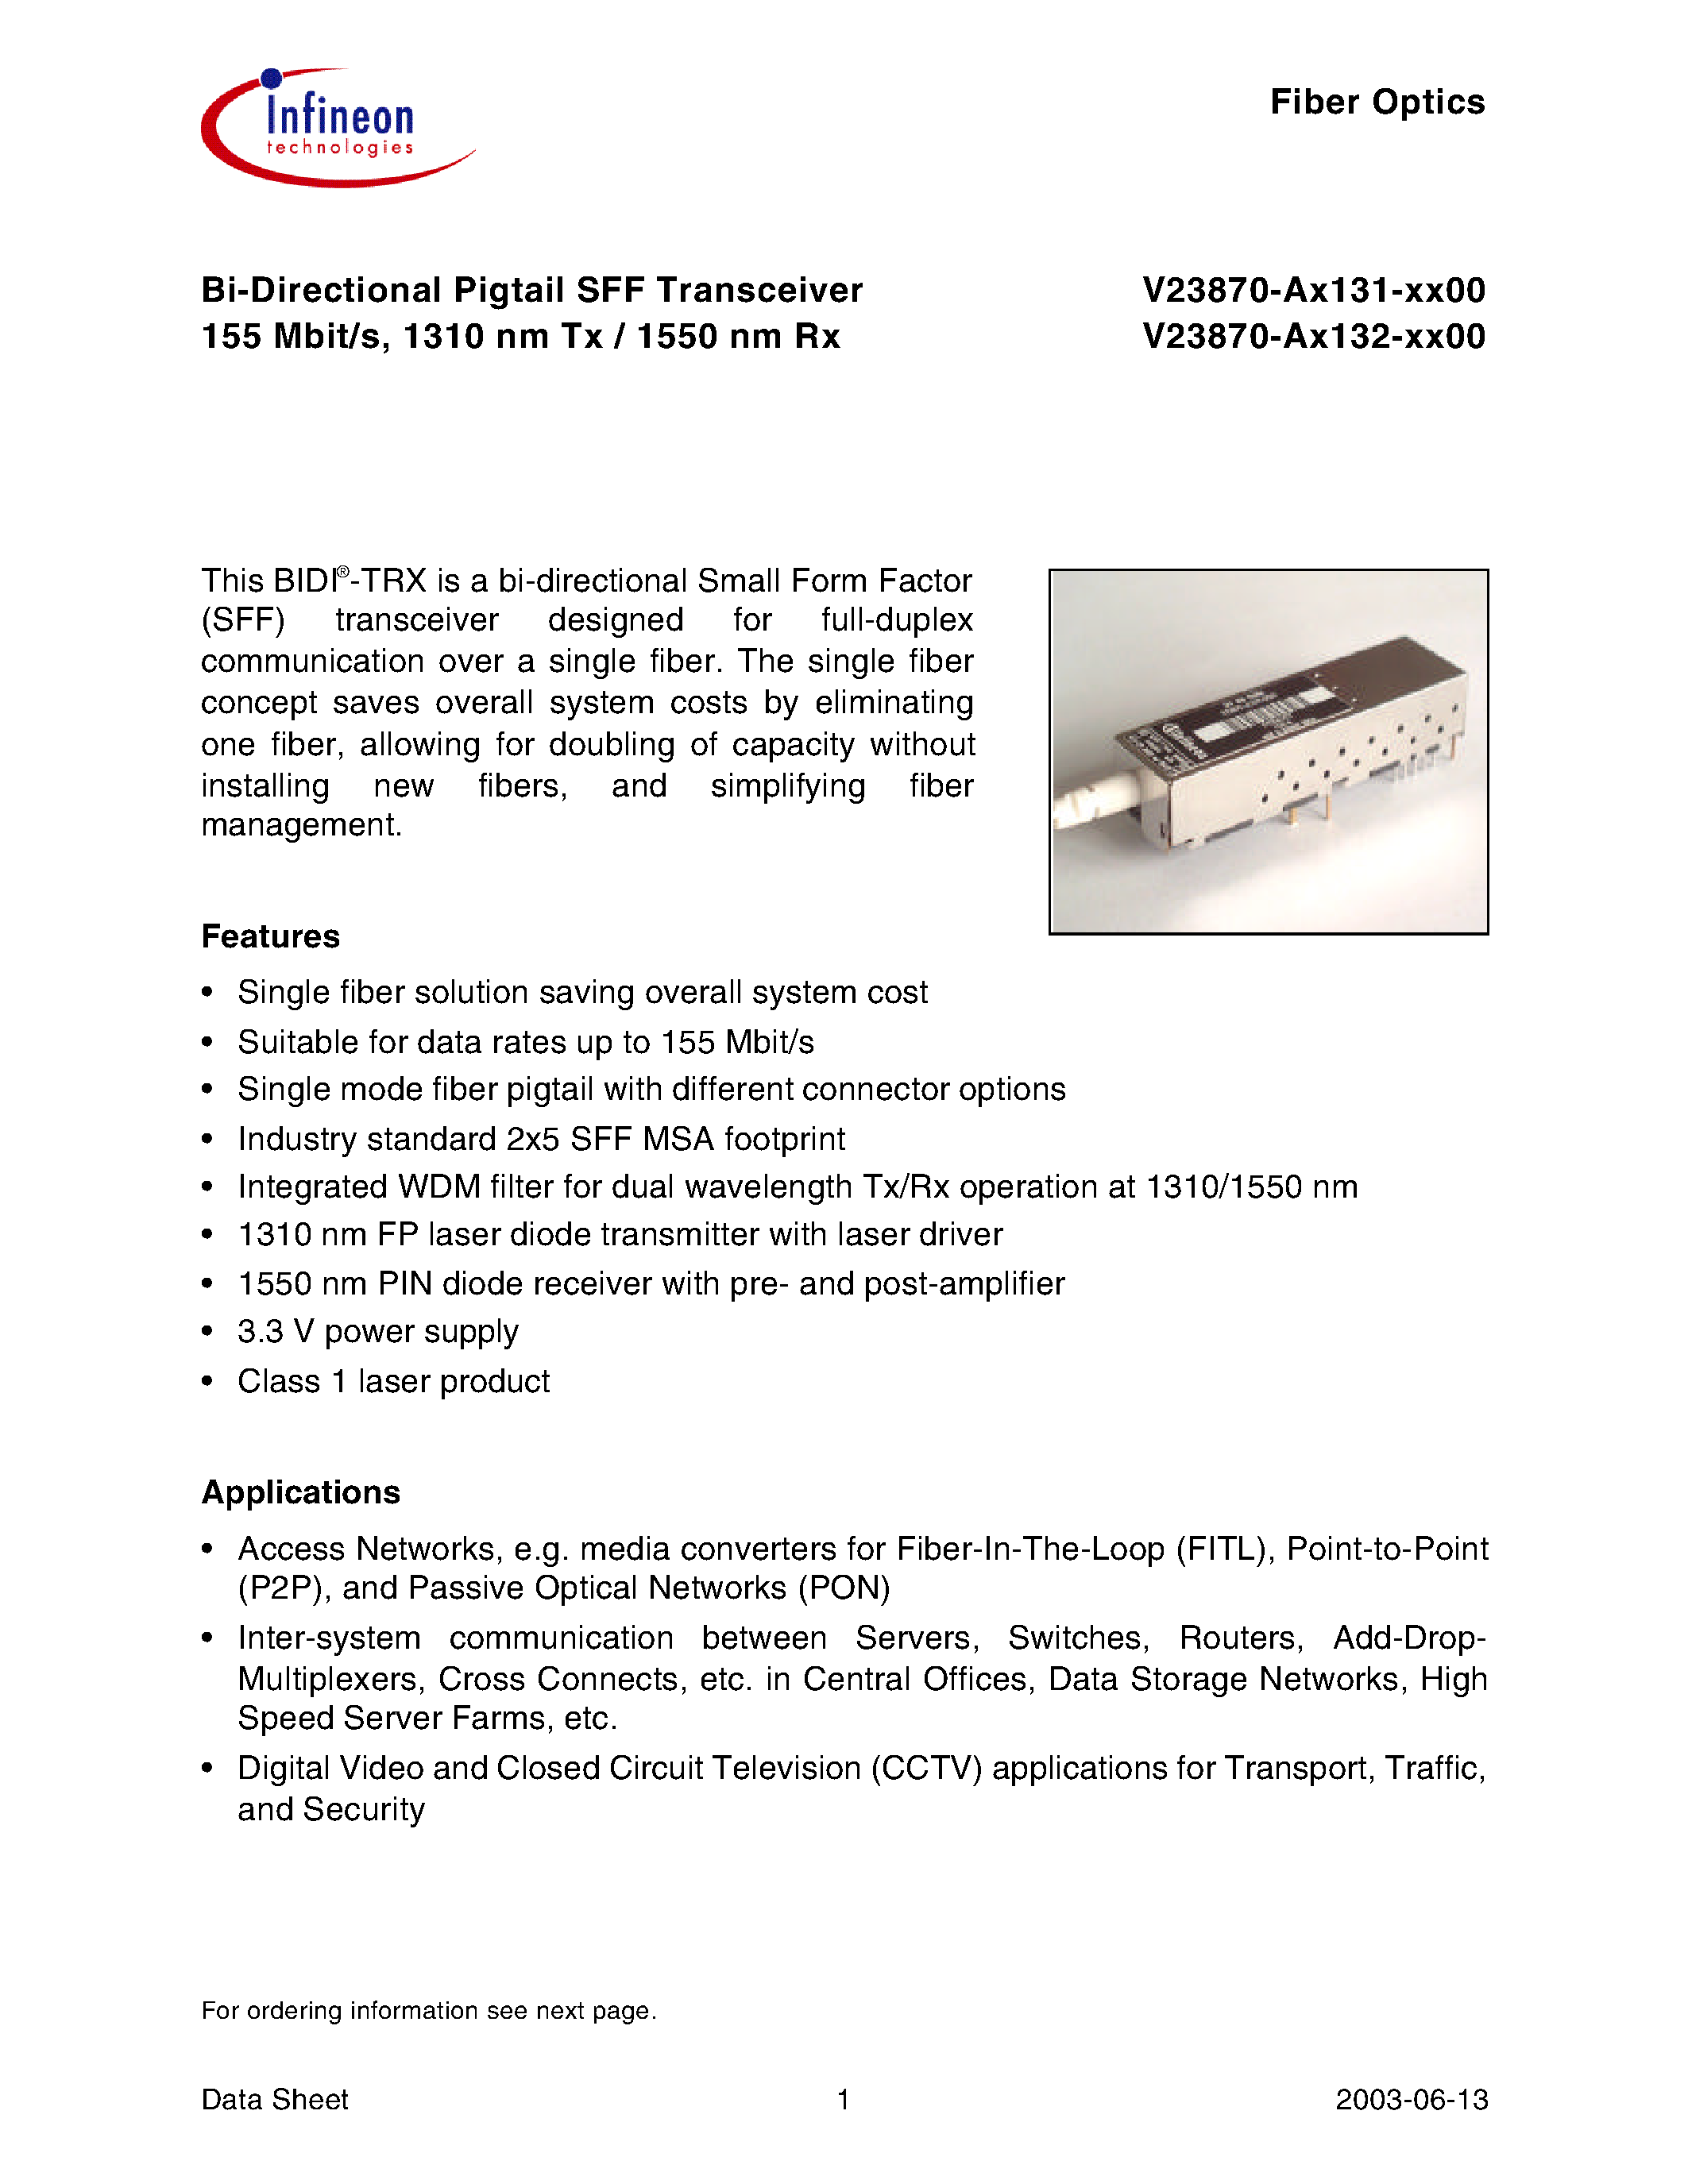 Datasheet V23870-A3131-C600 - Bi-Directional Pigtail SFF Transceiver 155 Mbit/s/ 1310 nm Tx / 1550 nm Rx page 1